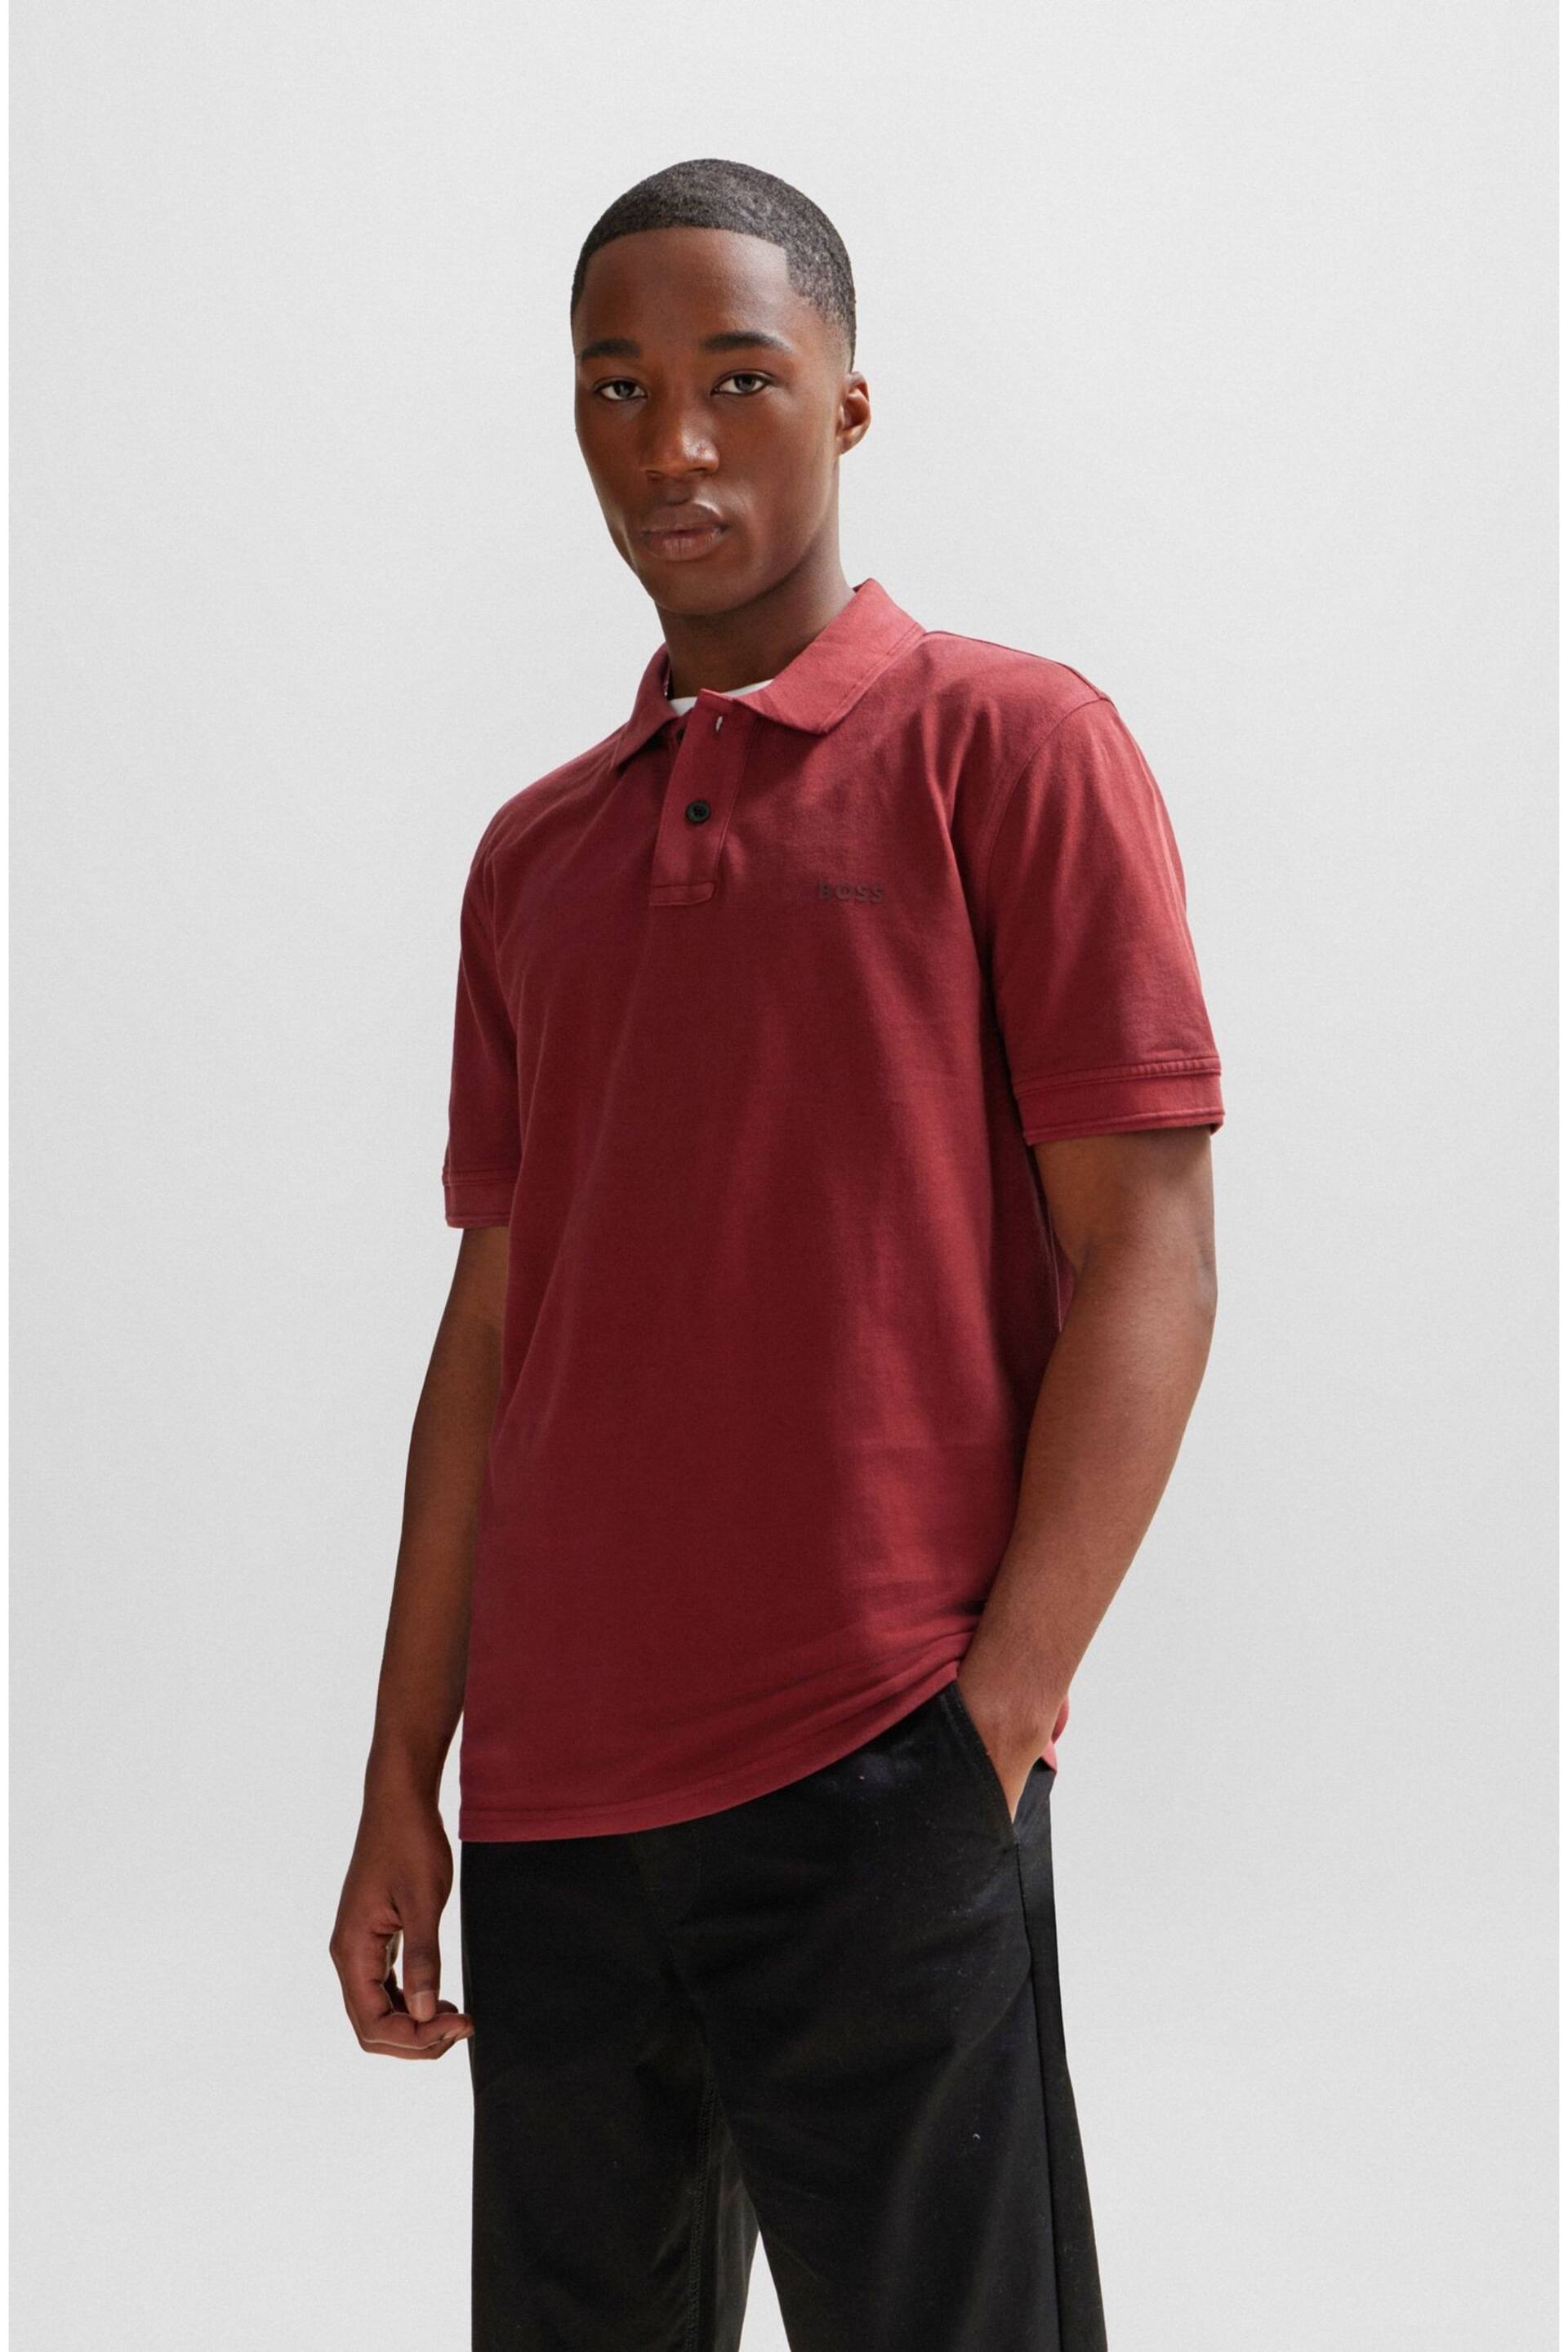 BOSS Red Cotton Pique Polo Shirt - Image 1 of 5